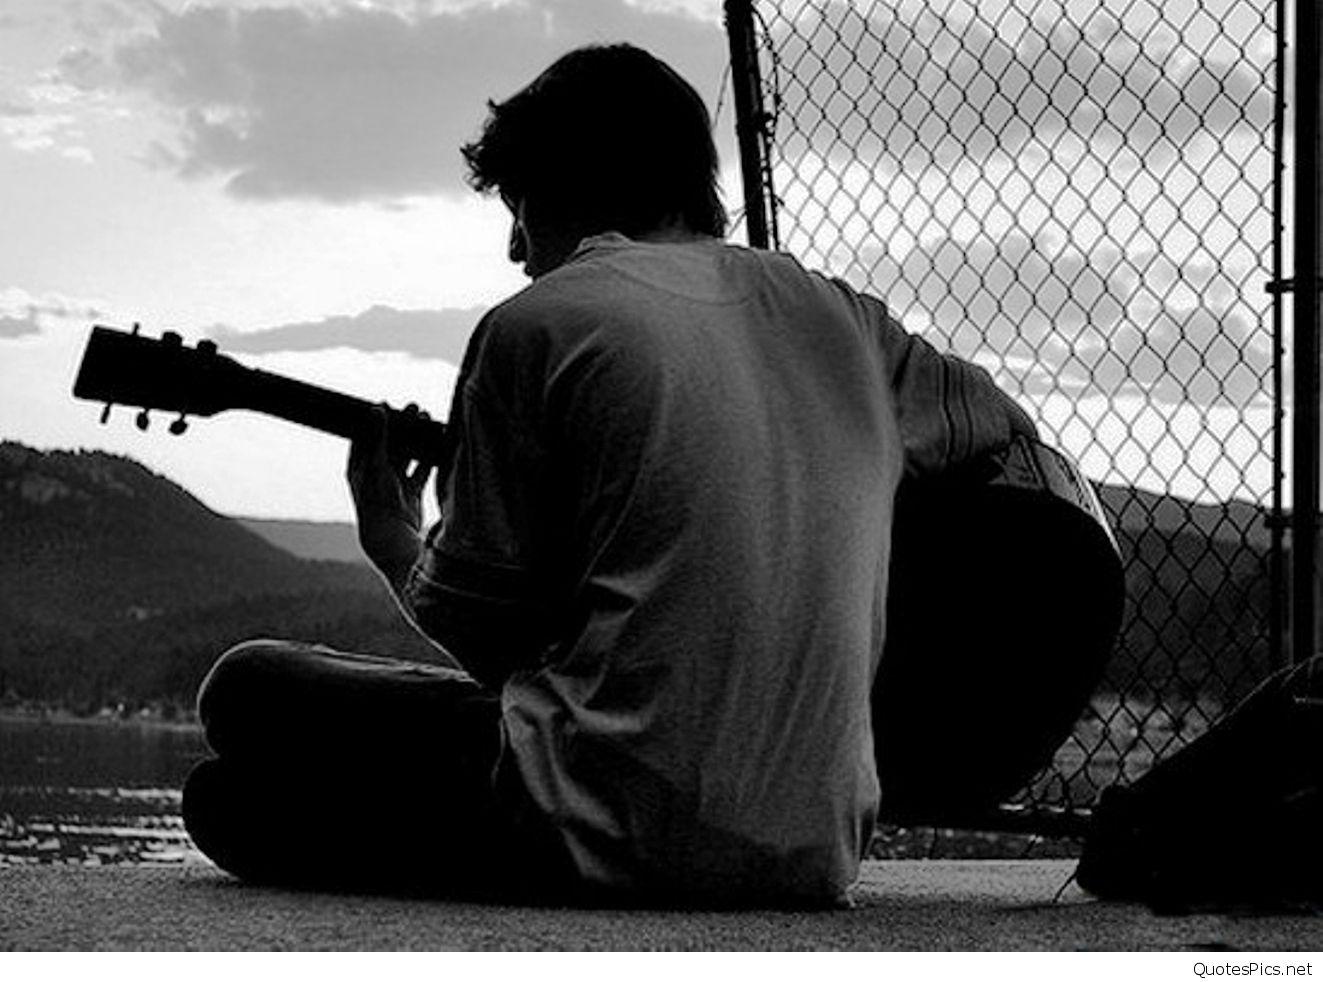 alone sad boy in love with guitar